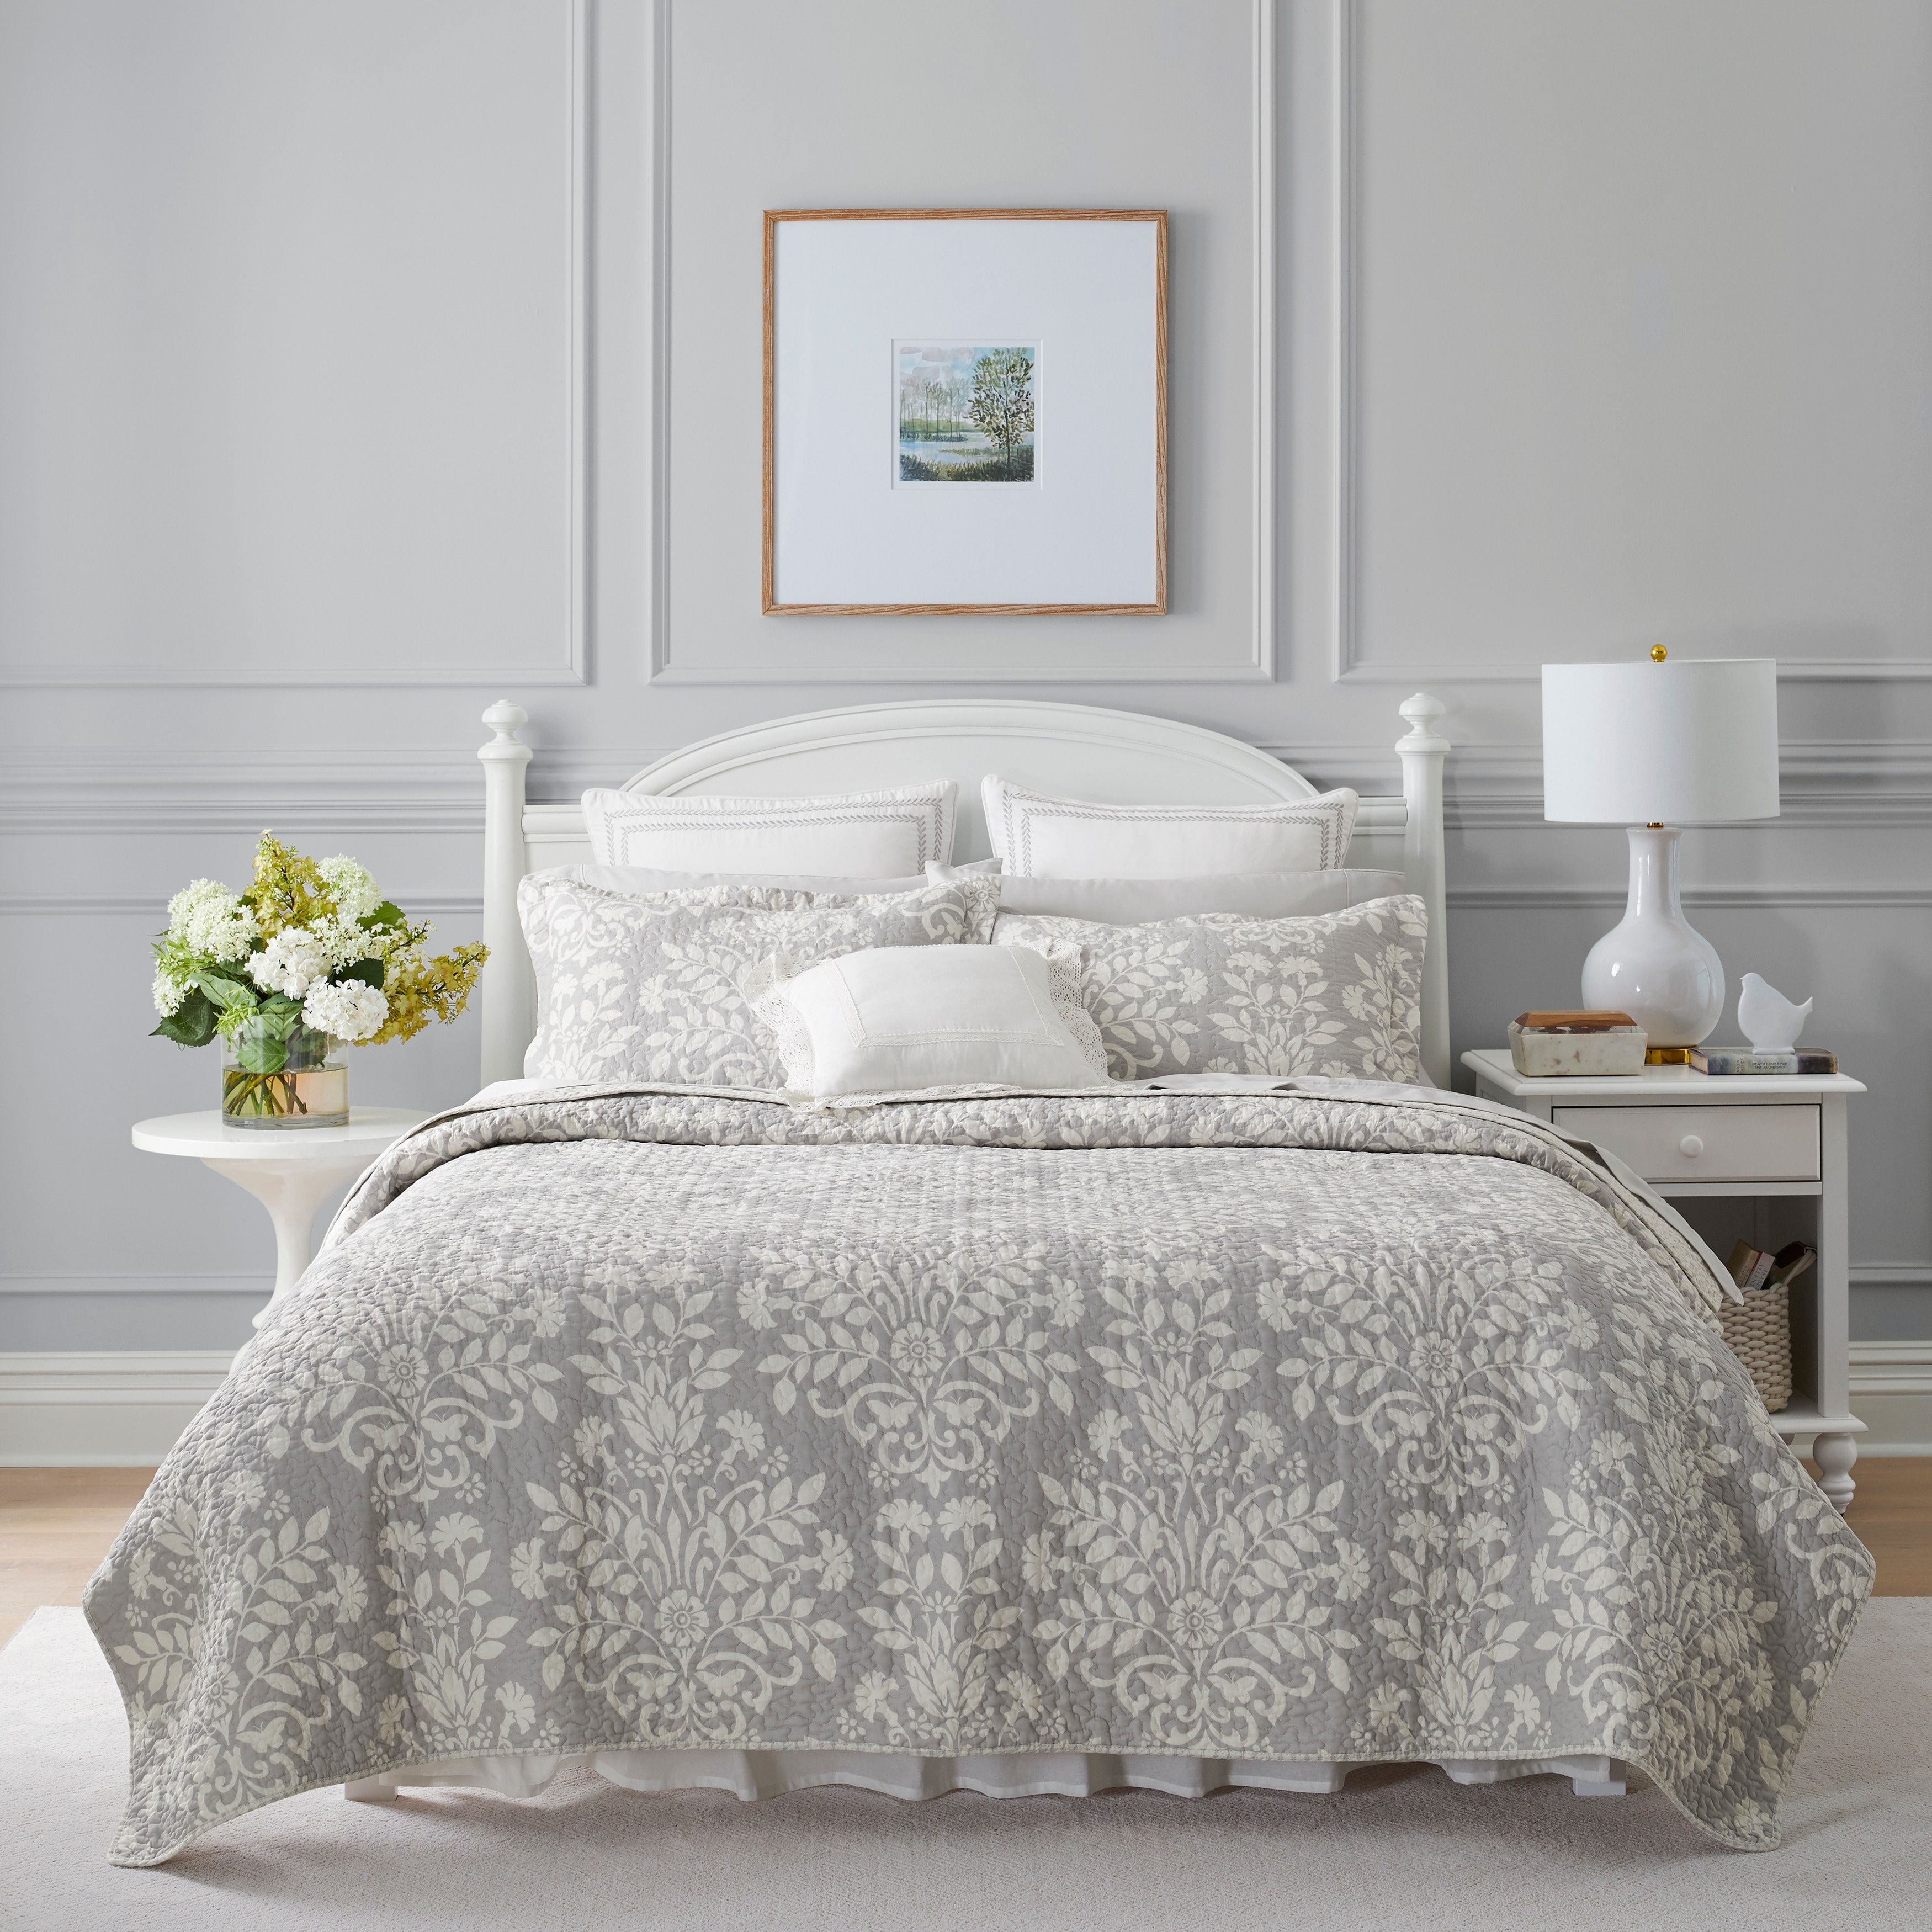 https://ak1.ostkcdn.com/images/products/is/images/direct/5248e3360e3c0ade1f333656807d9715eacd7928/Laura-Ashley-Rowland-Cotton-Reversible-Grey-Quilt-Set.jpg